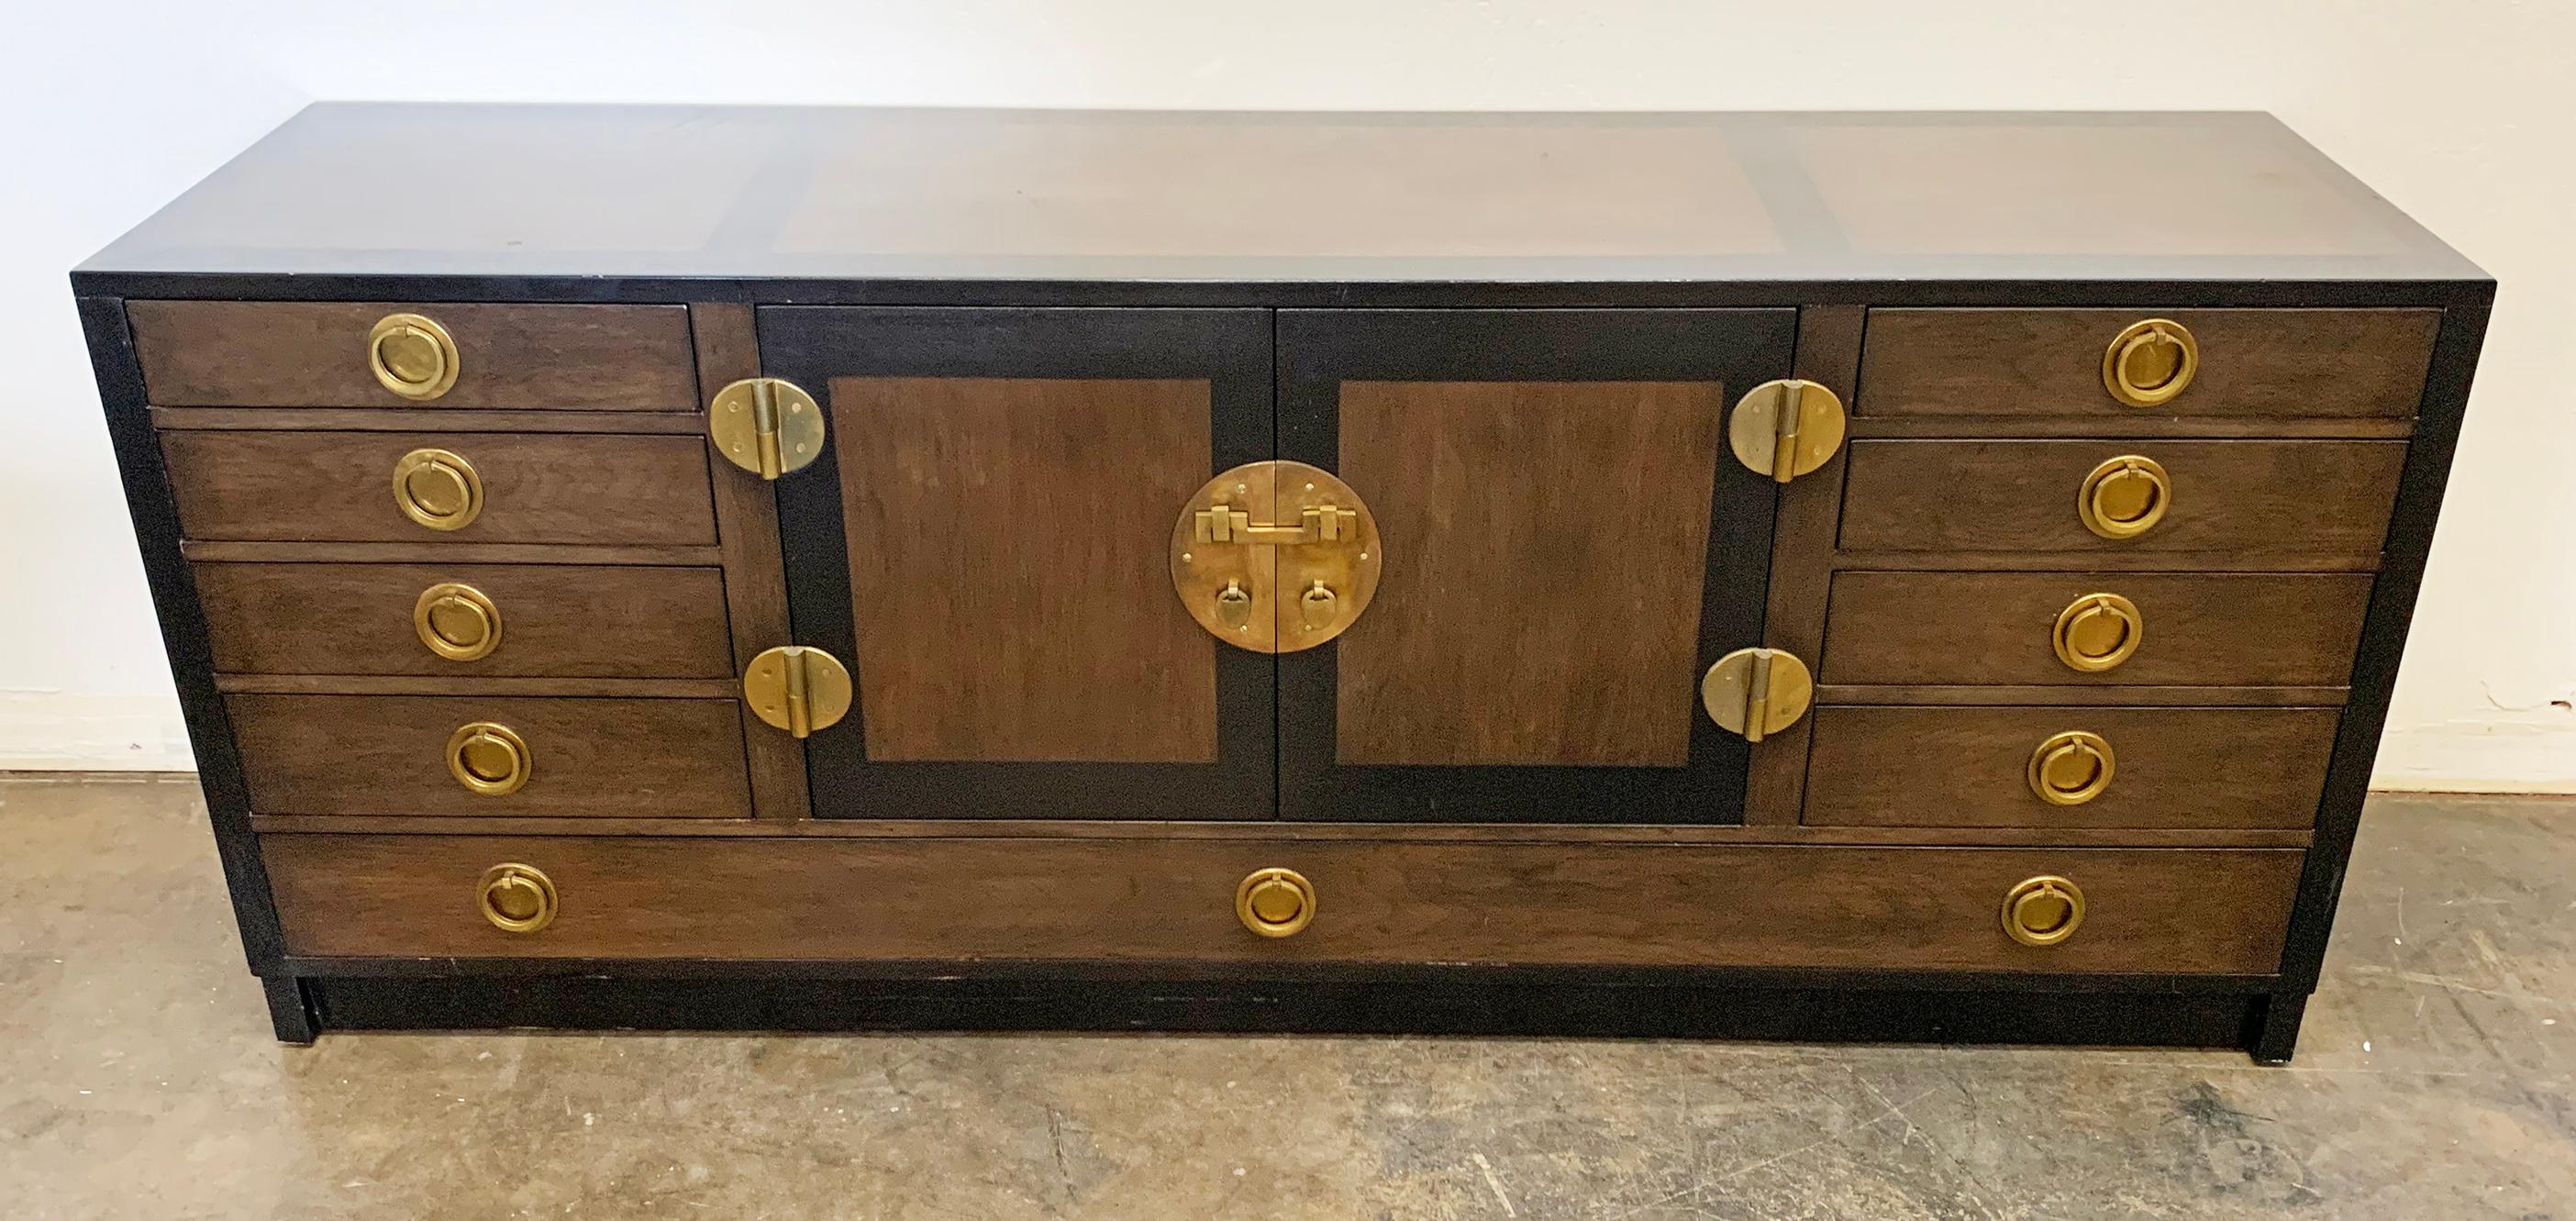 This buffet is absolutely stunning! This ebonized mahogany and walnut sideboard / buffet designed by Edward Wormley for Dunbar features heavy brass accents and pulls in a gorgeous chinoiserie feel.

A piece like this is so elegant and clean it can